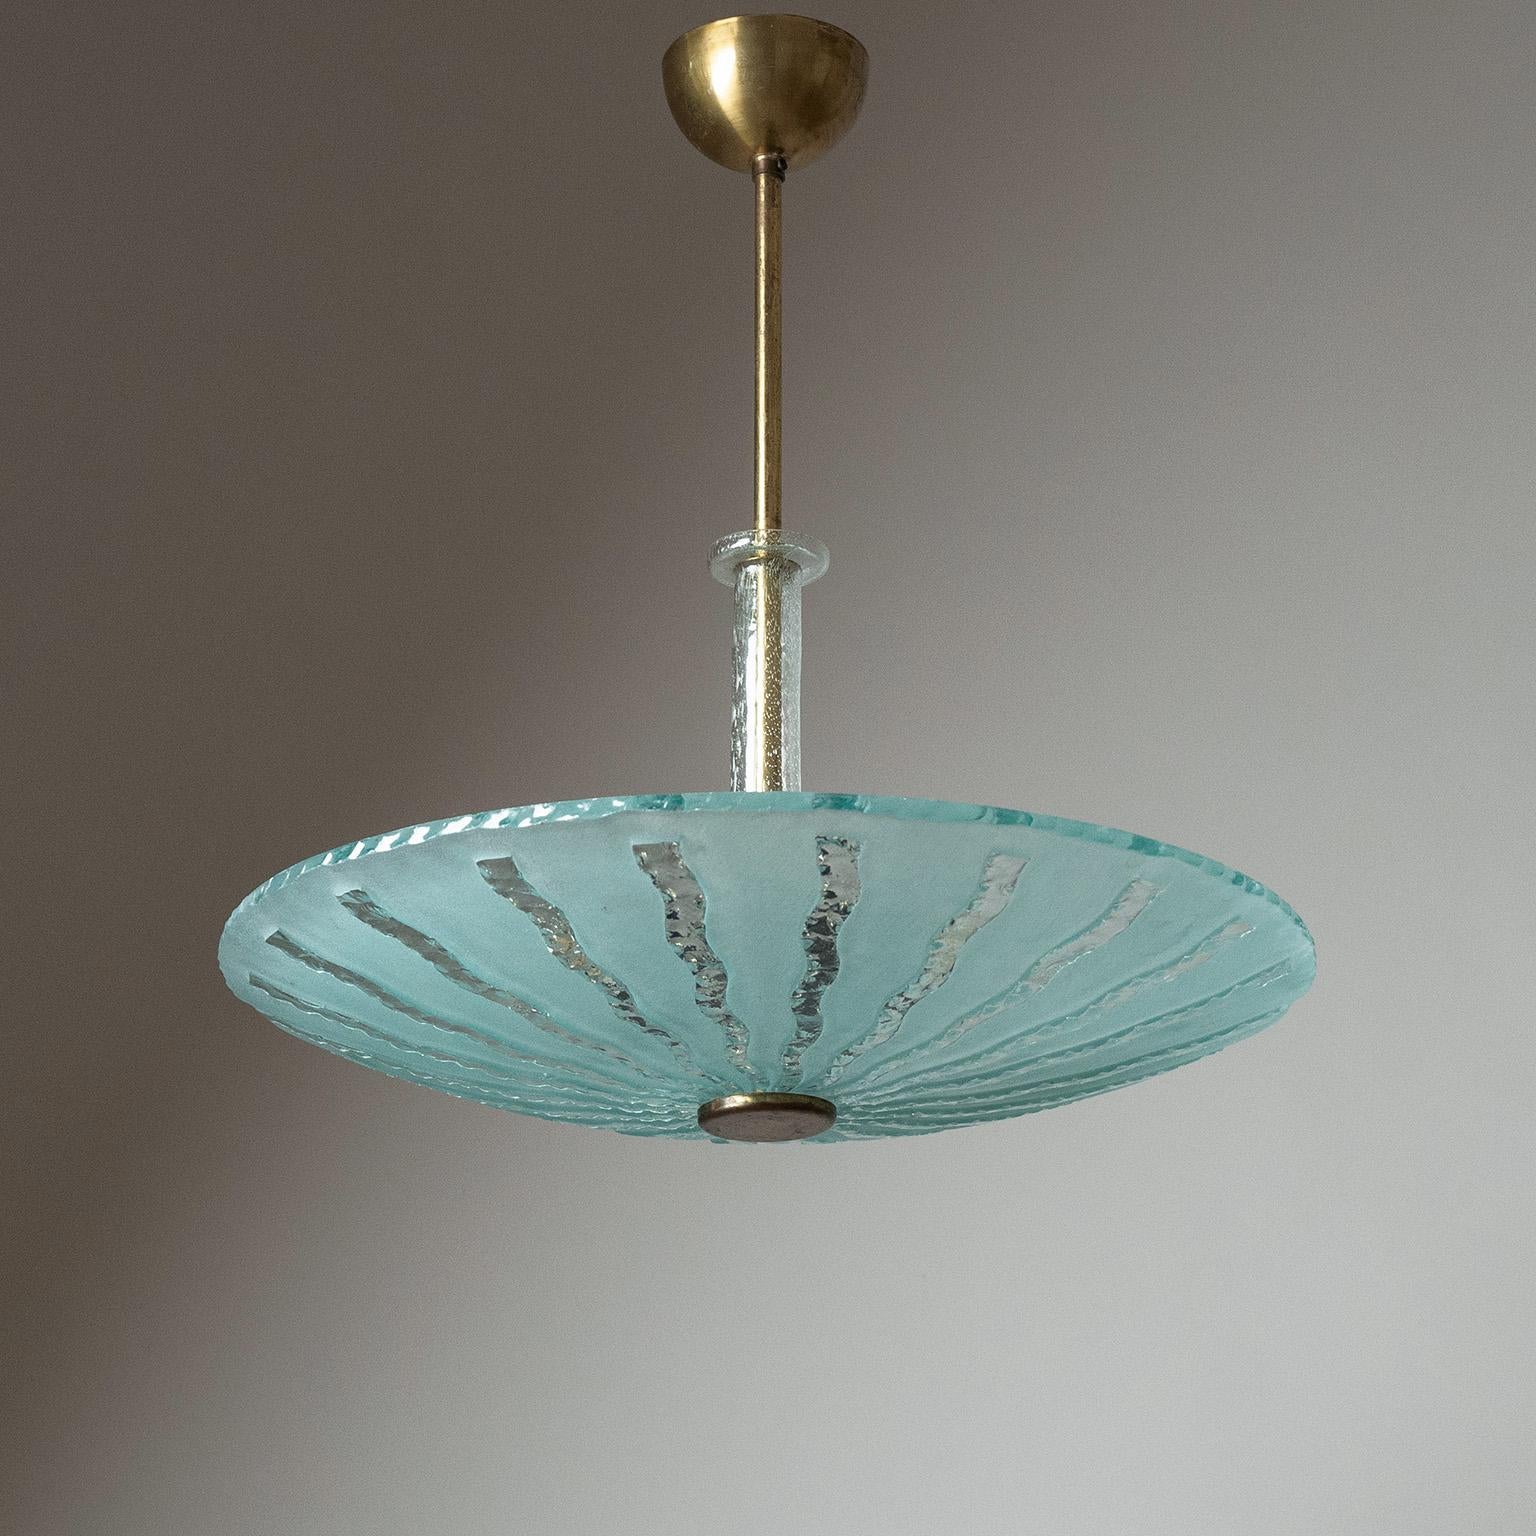 Rare Swedish Art Deco glass ceiling light from the 1930s. Thick ‚raw glass‘ diffuser with a frosted finish and chipped edge and sun ray motif. Three original bakelite E27 sockets with new wiring.
Measures: Height 51cm (20″), Diameter 49cm (19″),